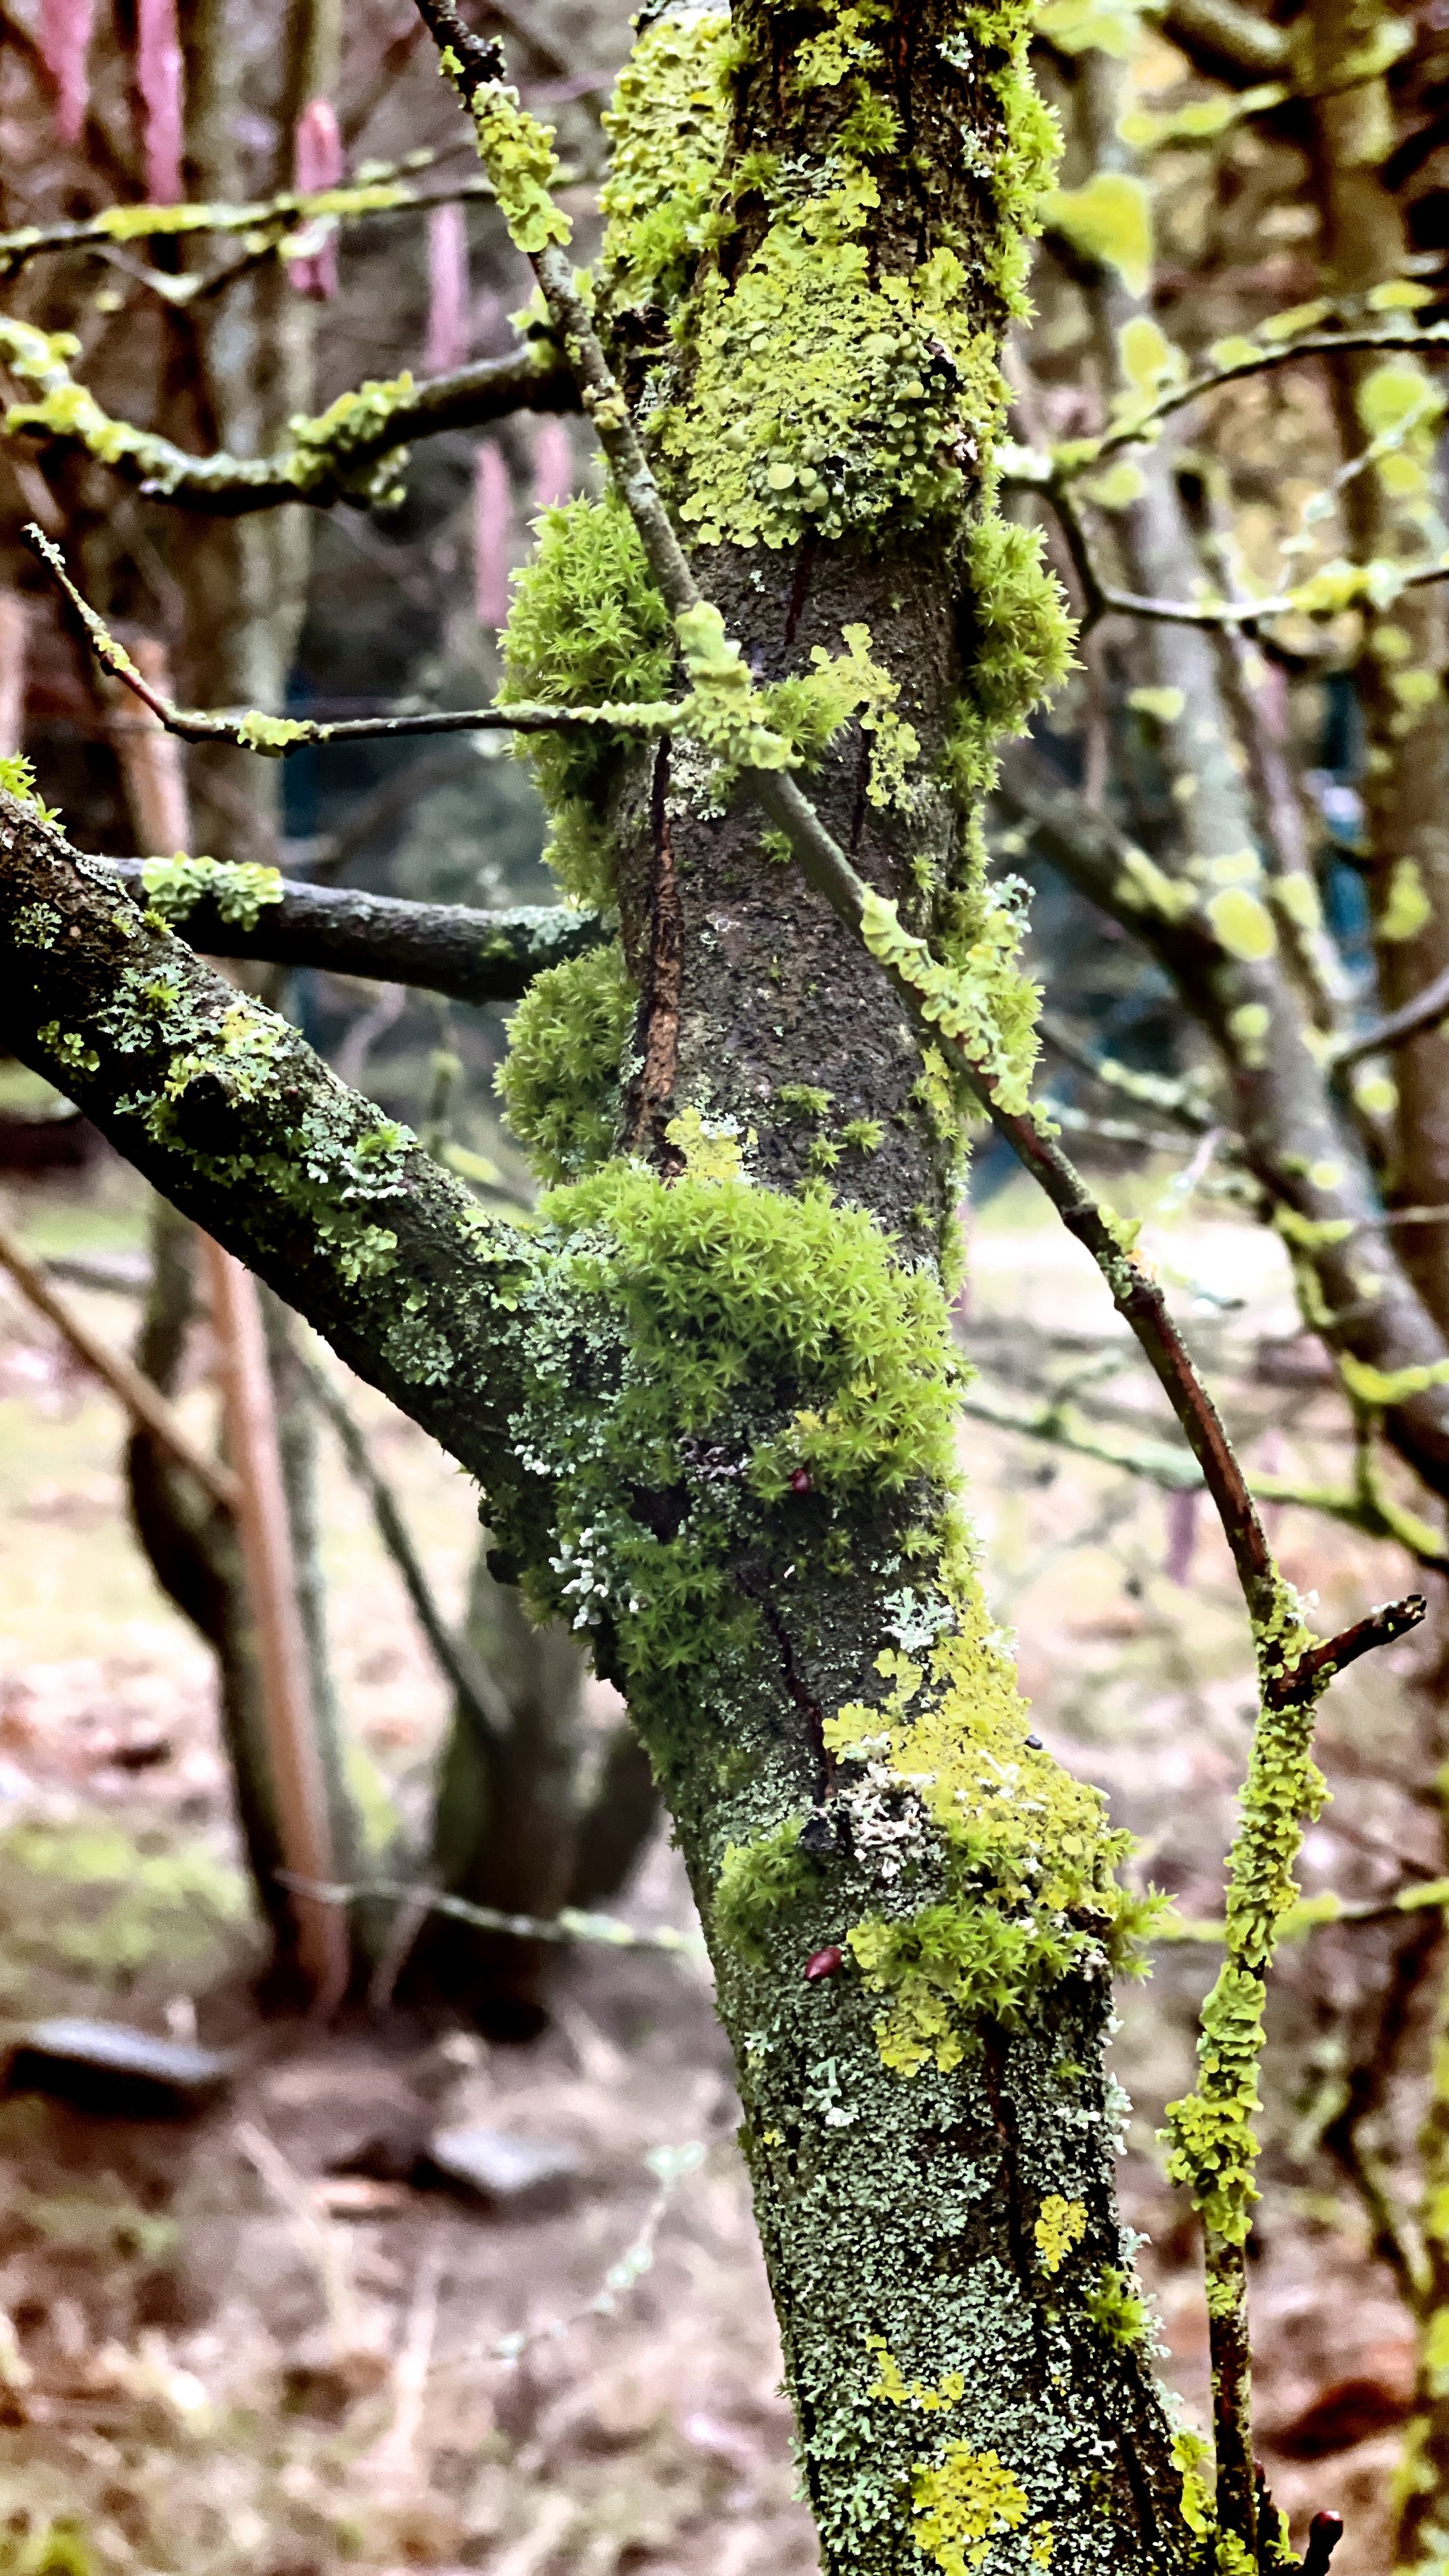 Close-up of a tree trunk with green moss and lichen.